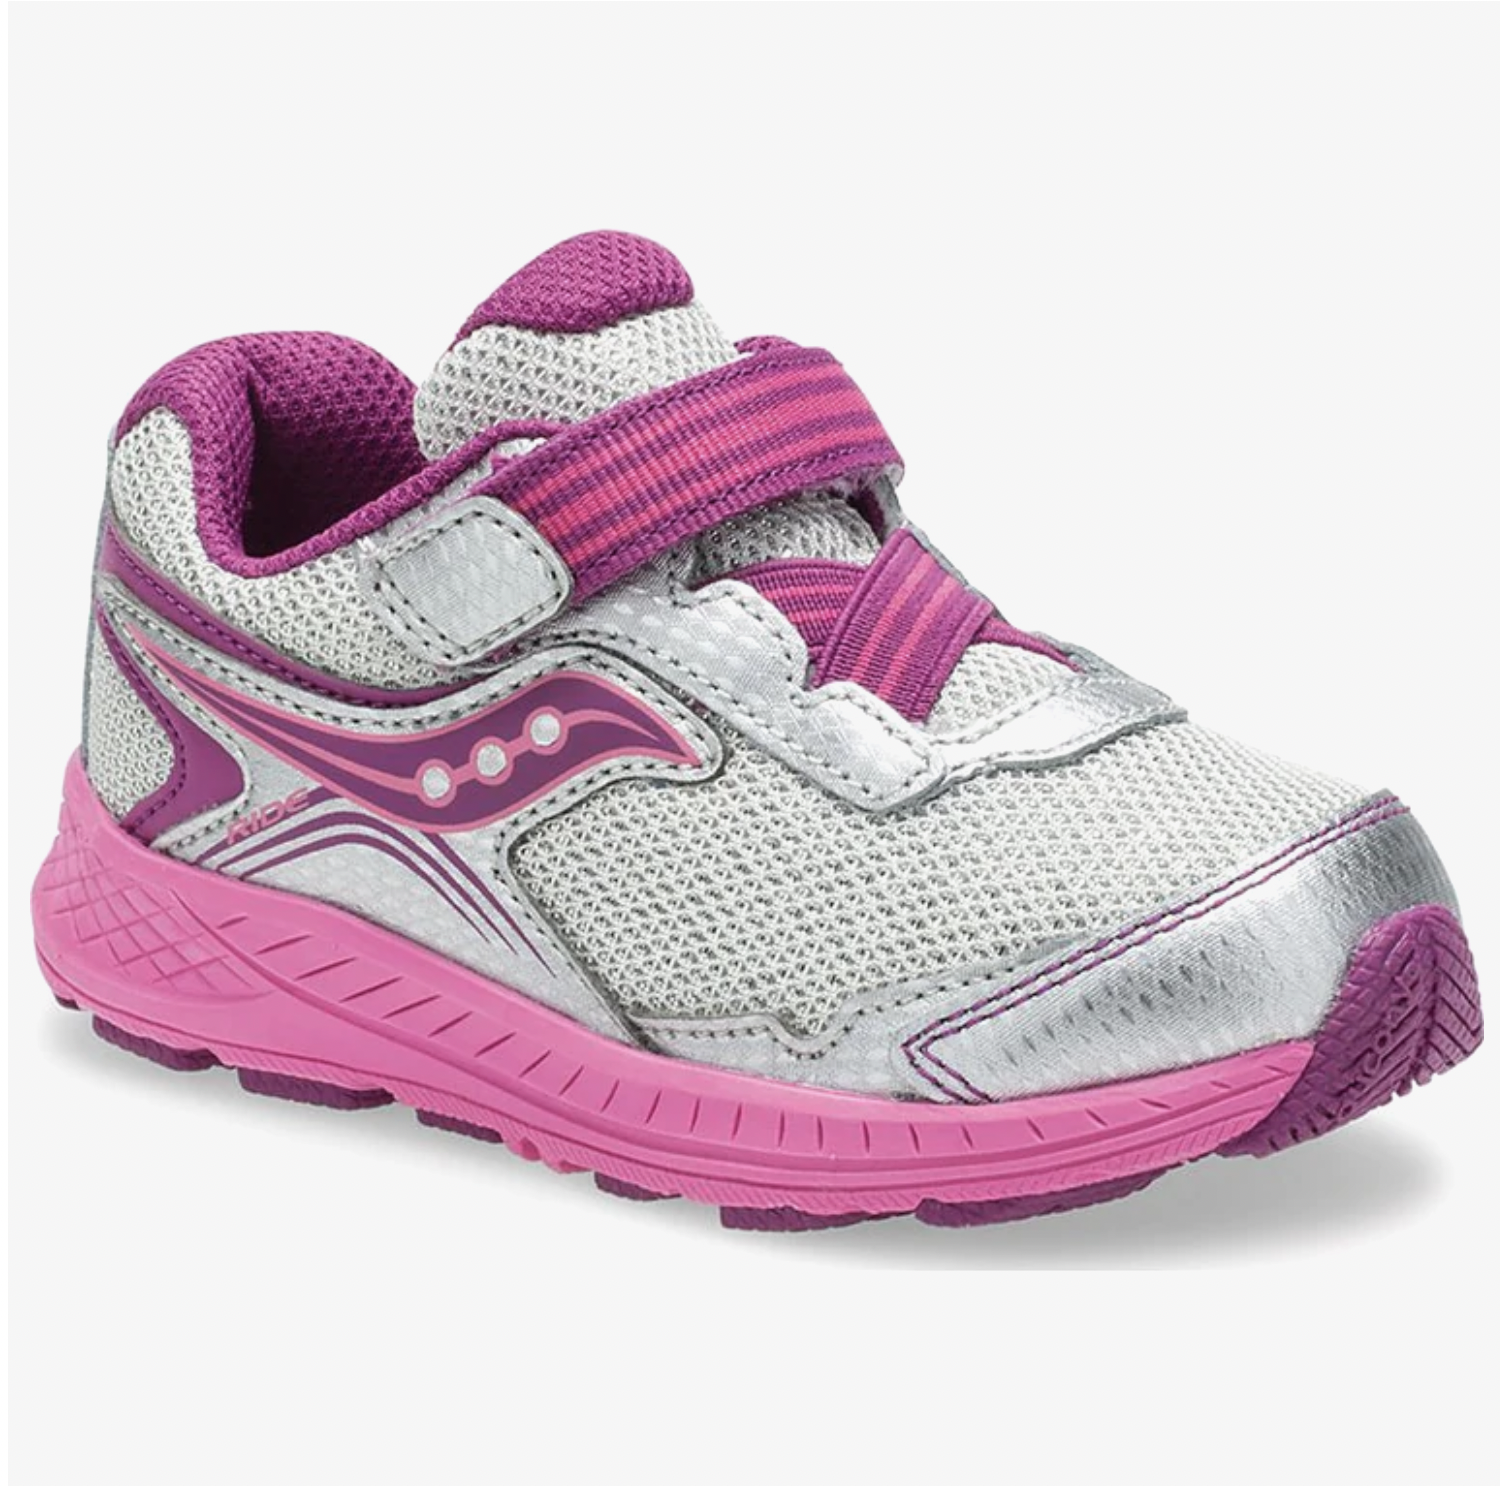 Stride Rite: Clearance Kids’ shoes for up to 75% off.